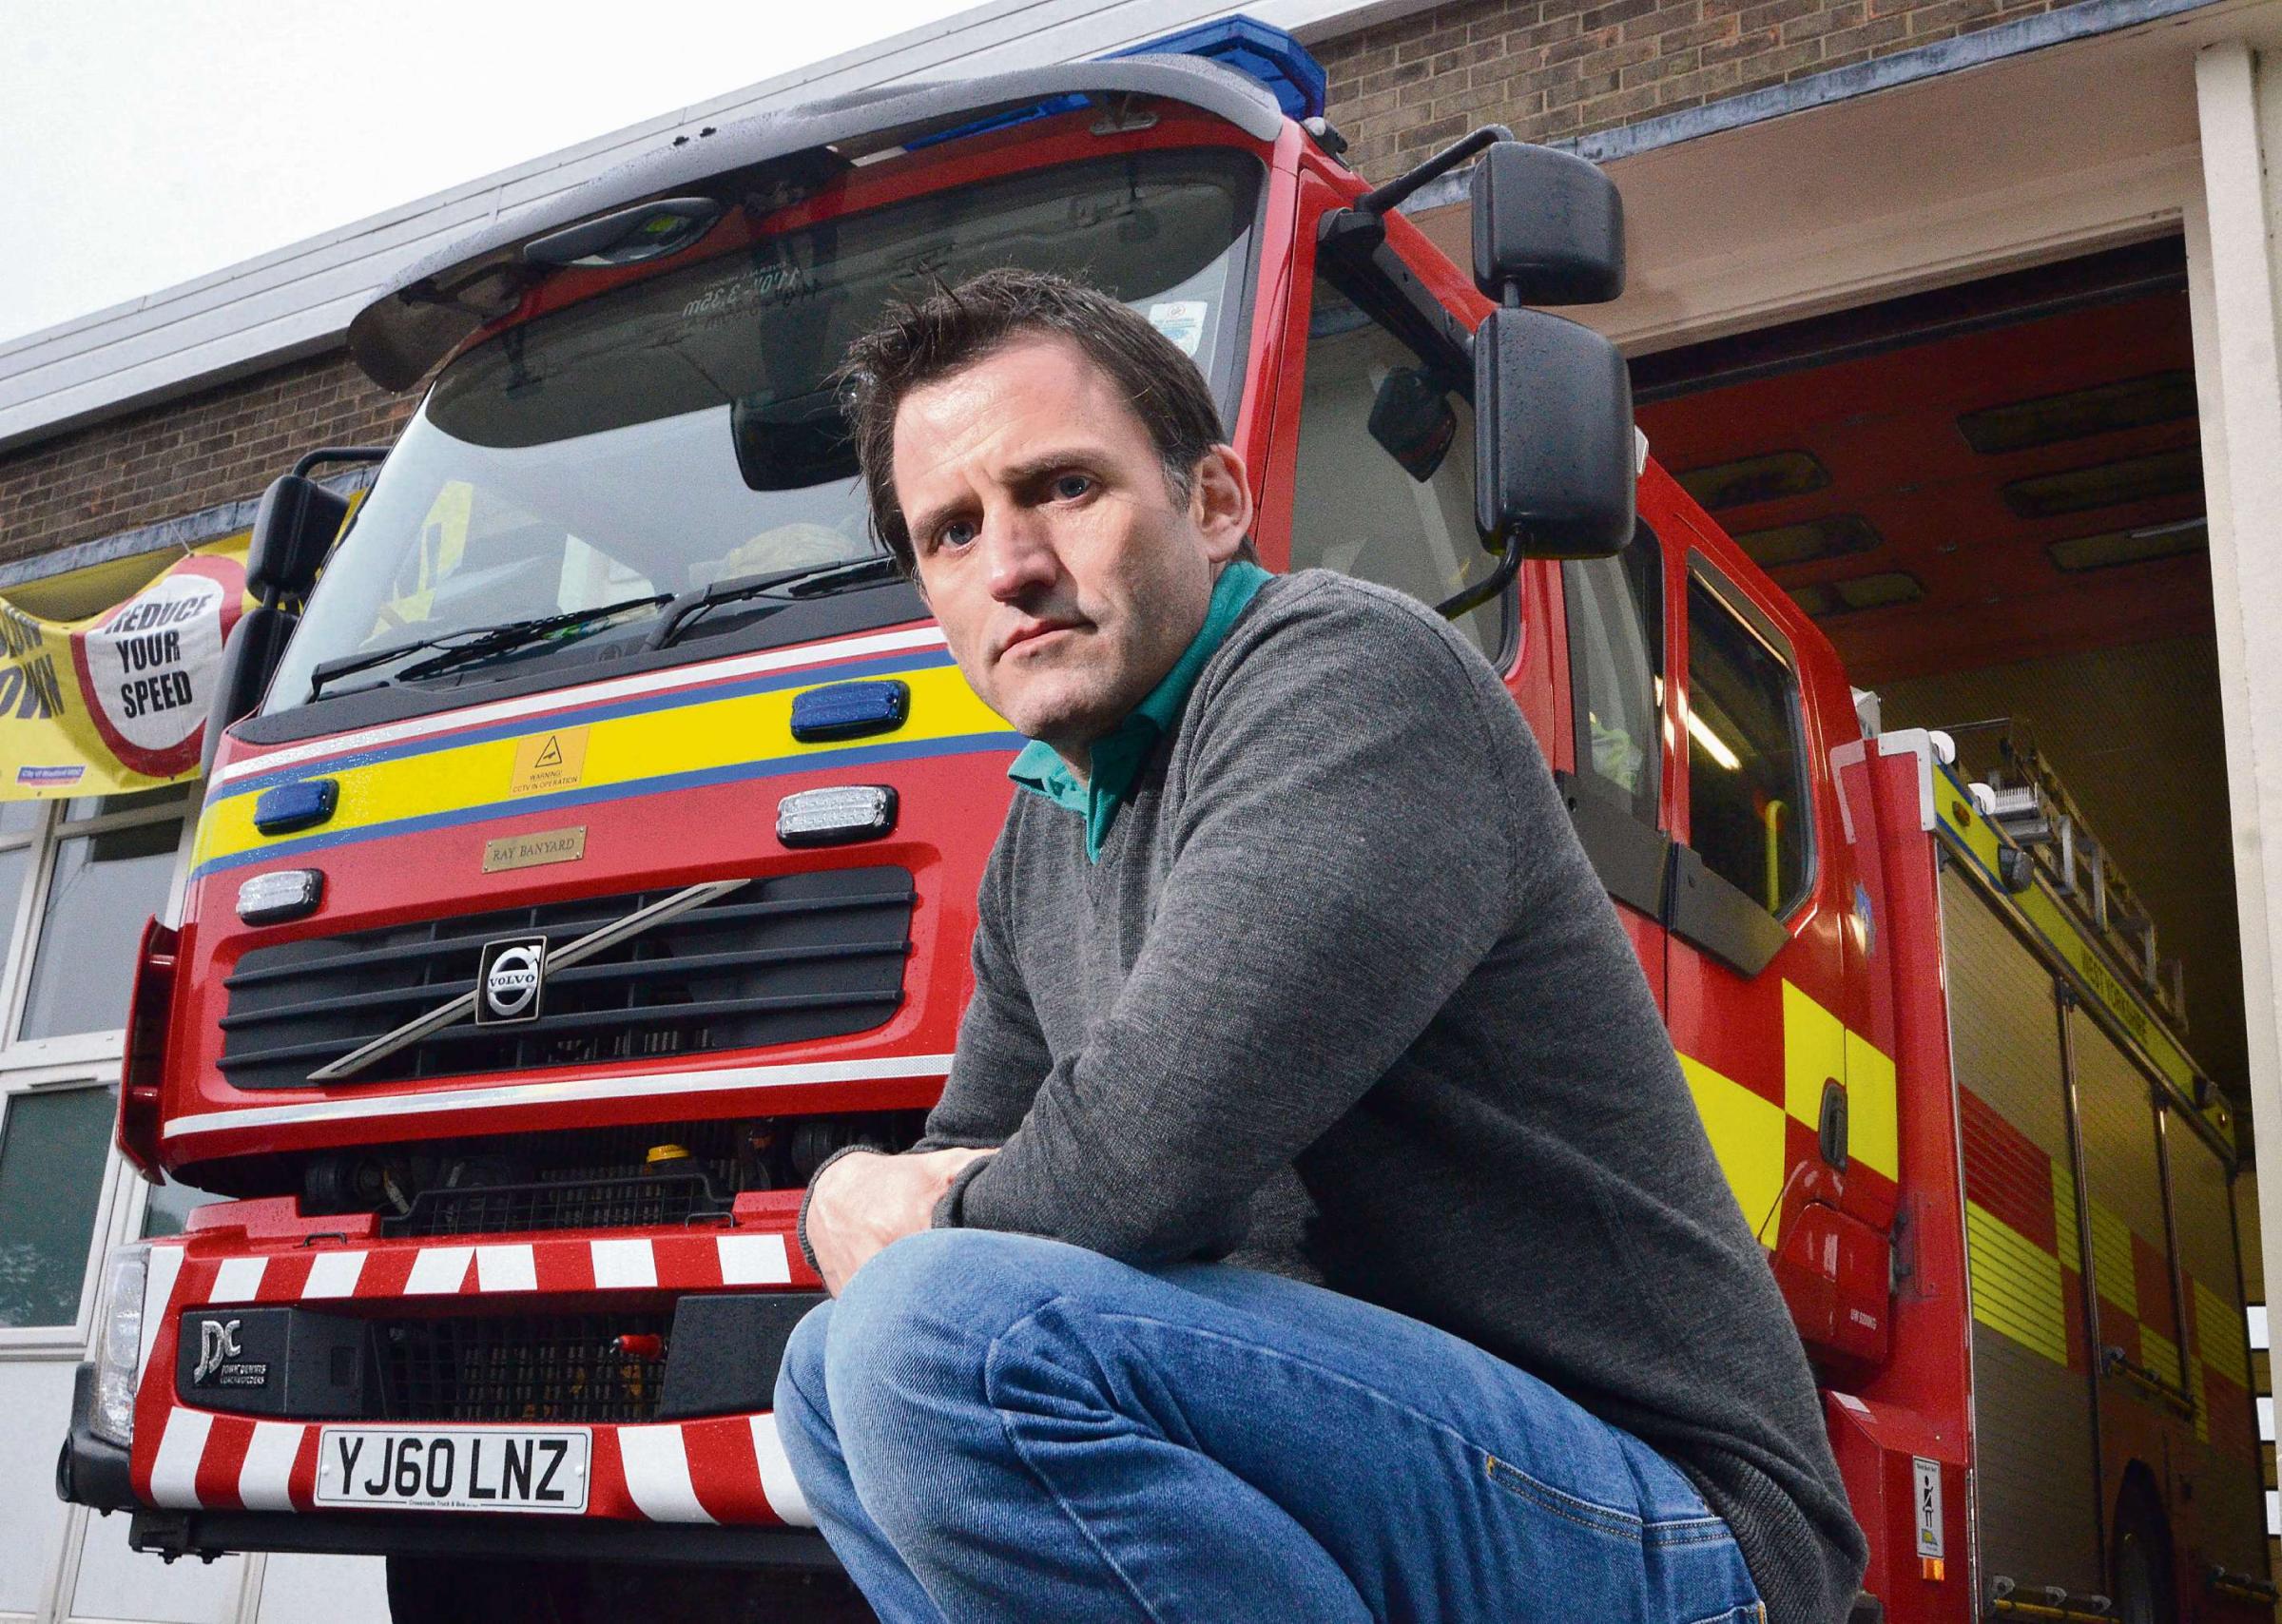 Union warns 'cuts cost lives' as fire authority prepares to axe 44 posts